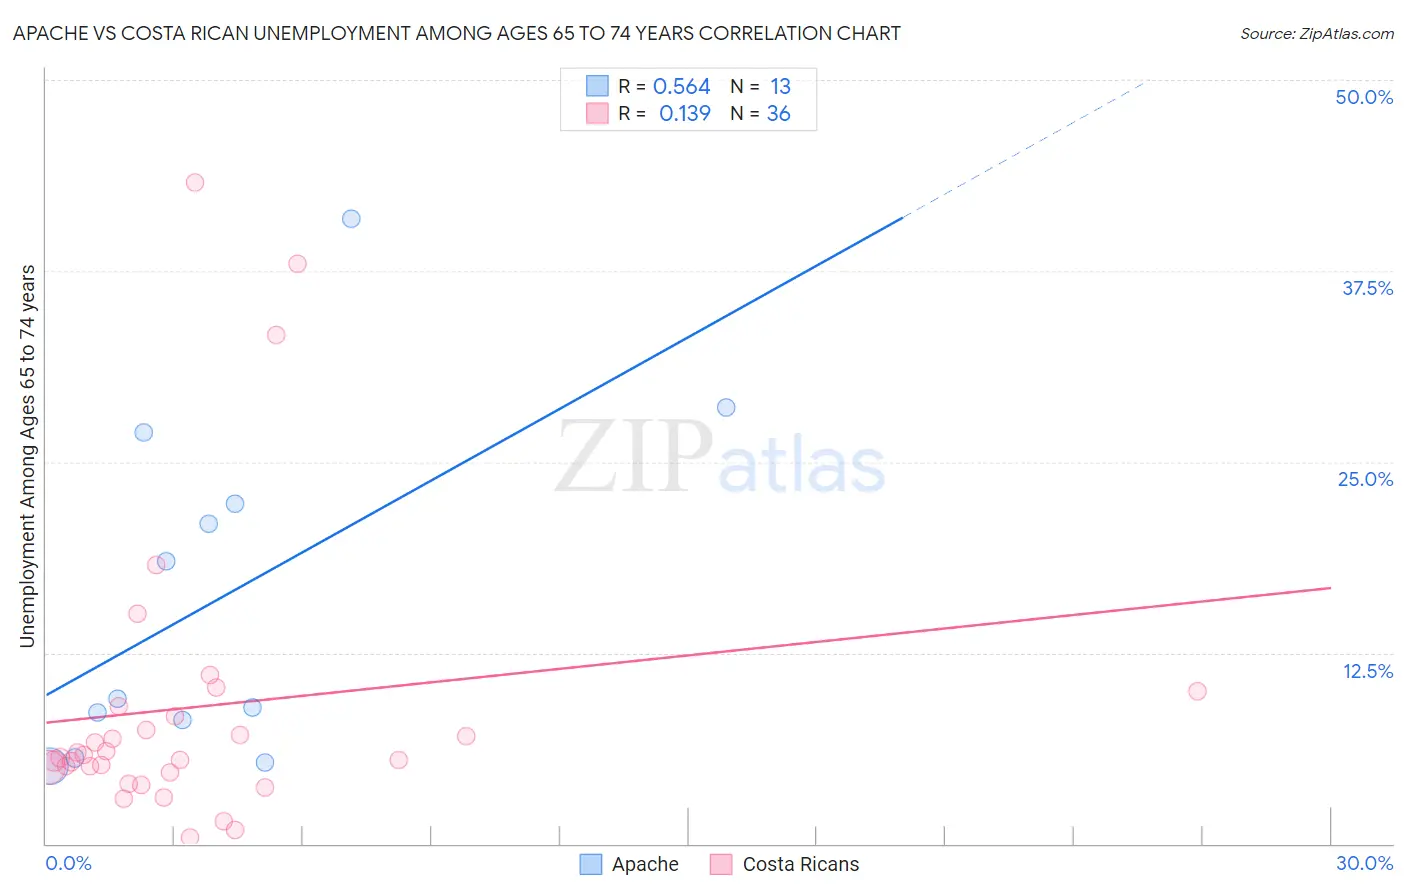 Apache vs Costa Rican Unemployment Among Ages 65 to 74 years